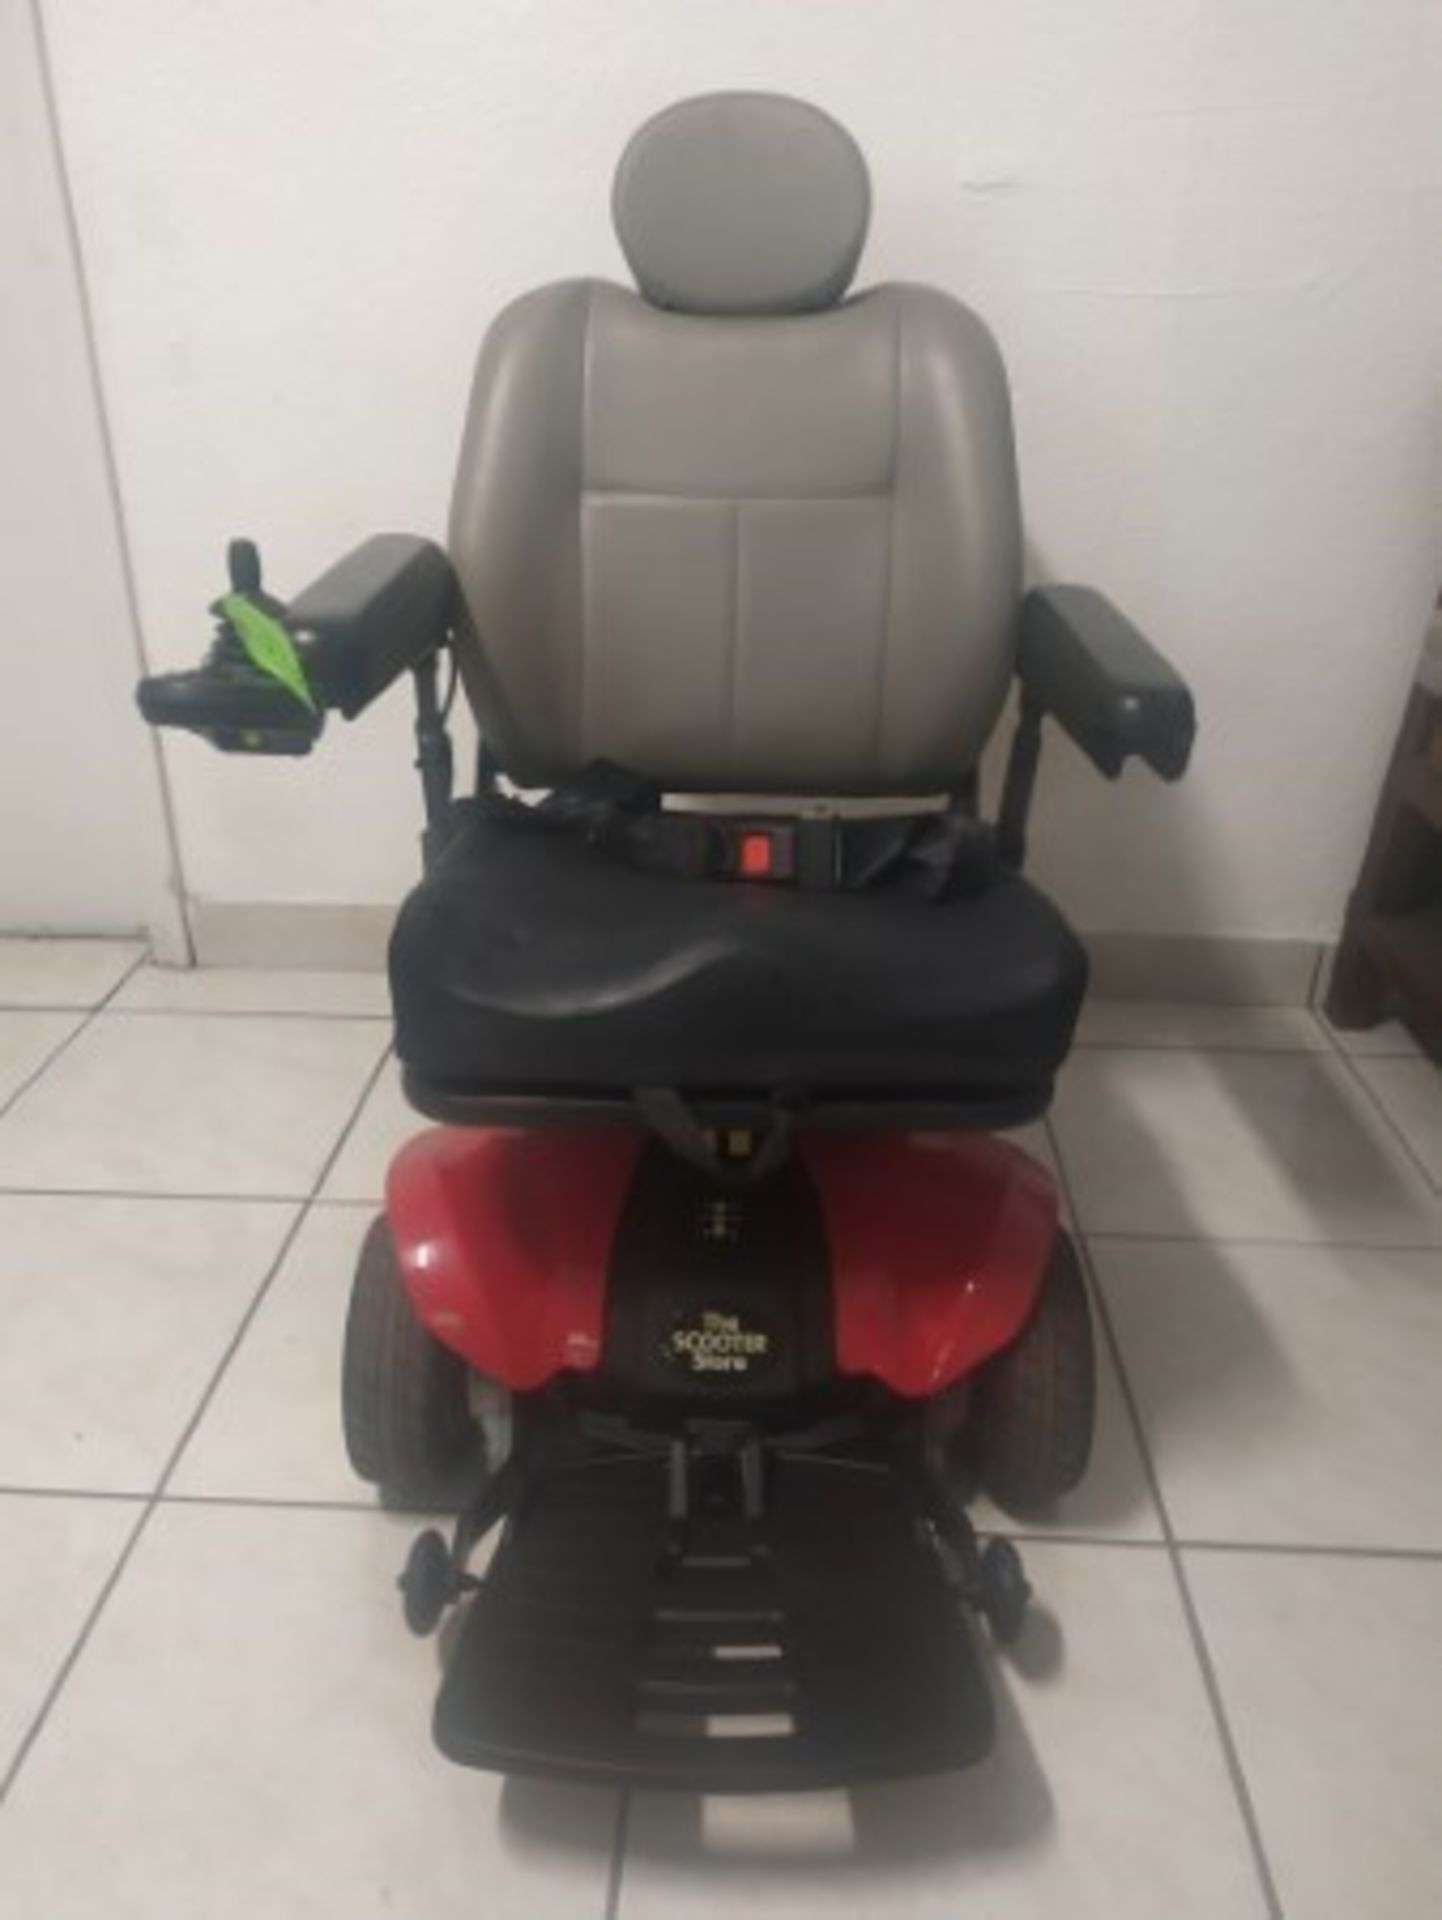 2015 PRIDE TSS300 6-WHEEL POWER CHAIR WITH JOYSTICK CONTROL - RED - 300LB CAPACITY - SERIAL No. JB10 - Image 2 of 4